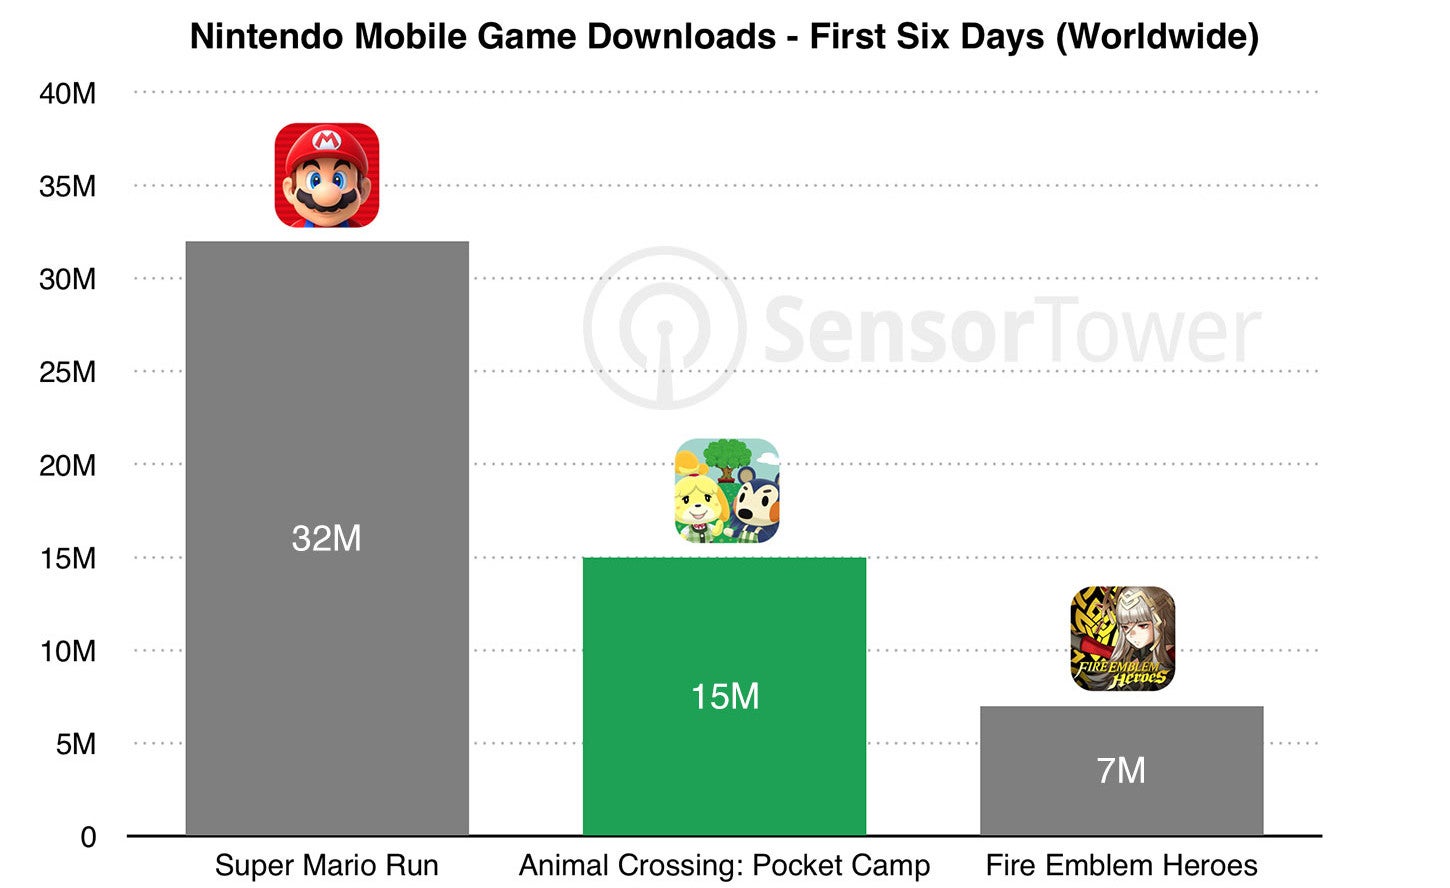 Animal Crossing: Pocket Camp scores 15 million downloads in just one week